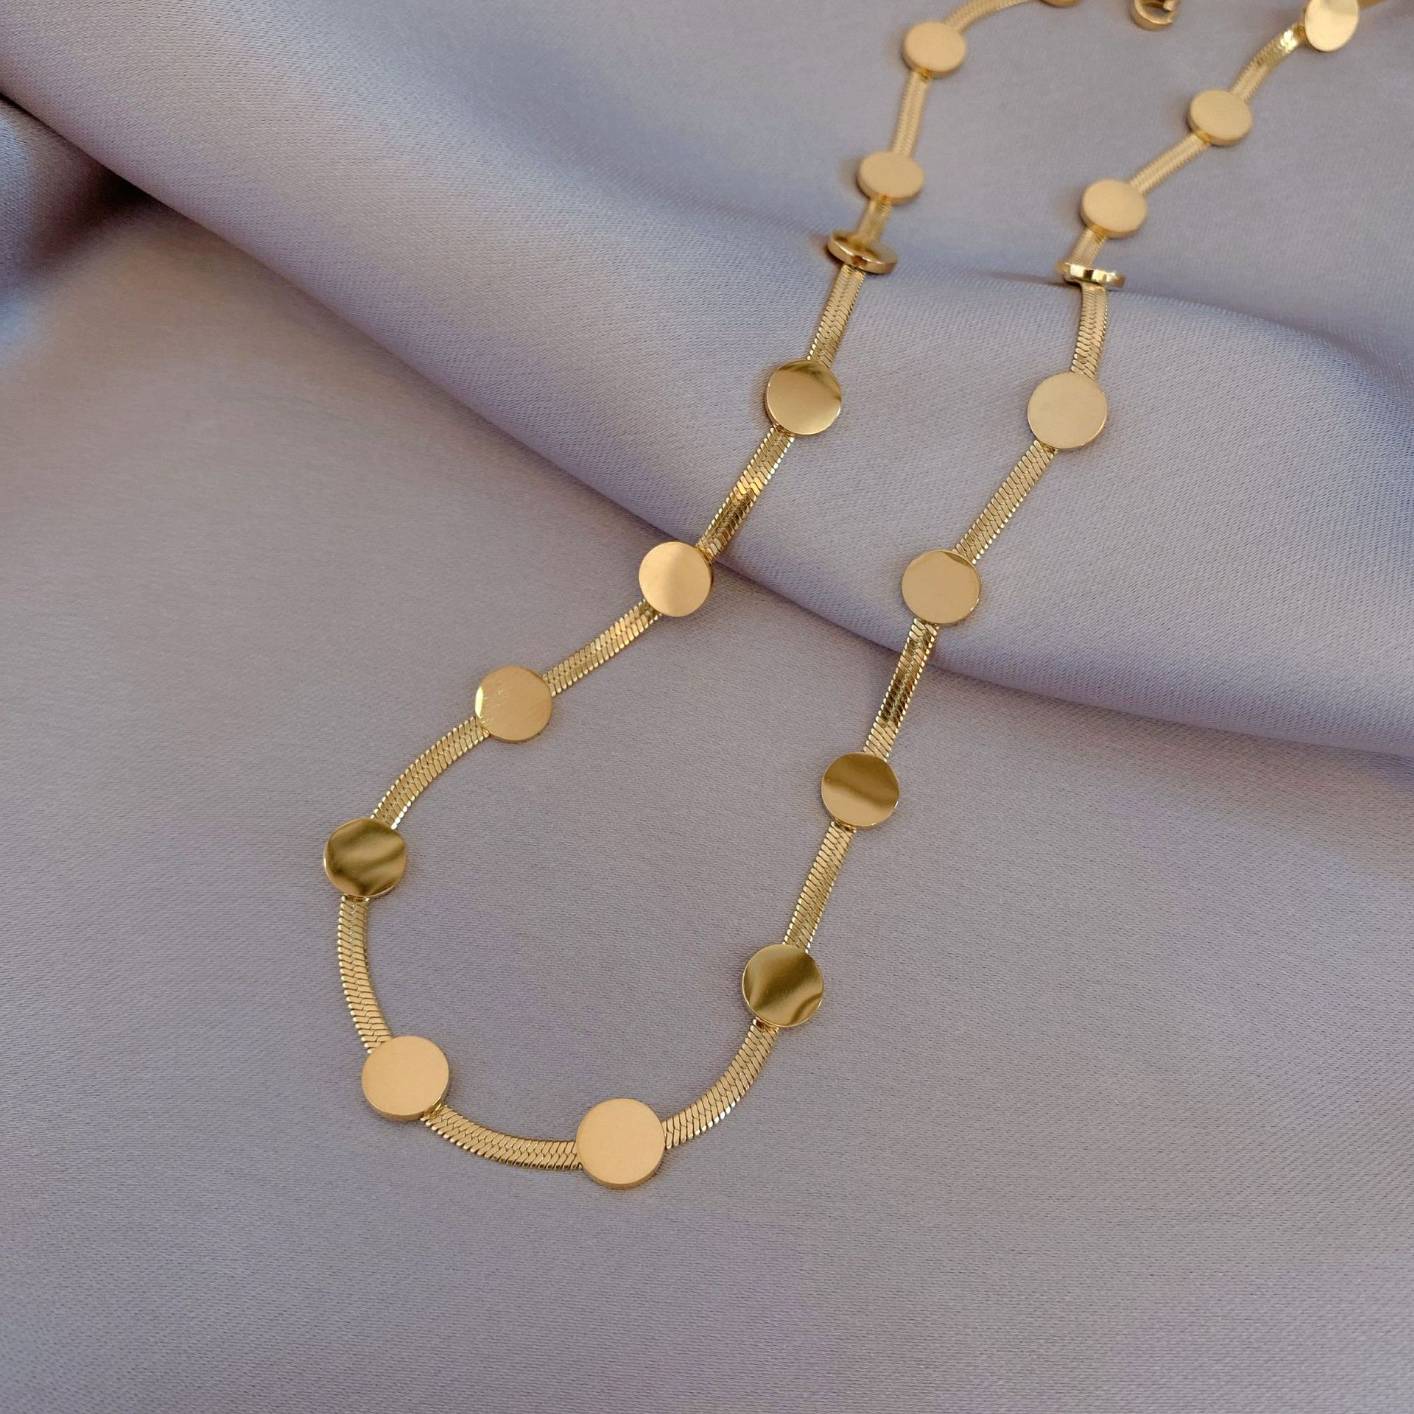 T098 Gold Plated Snake Chain with Flat Bead Decor Dainty Choker Necklace for Women Girls